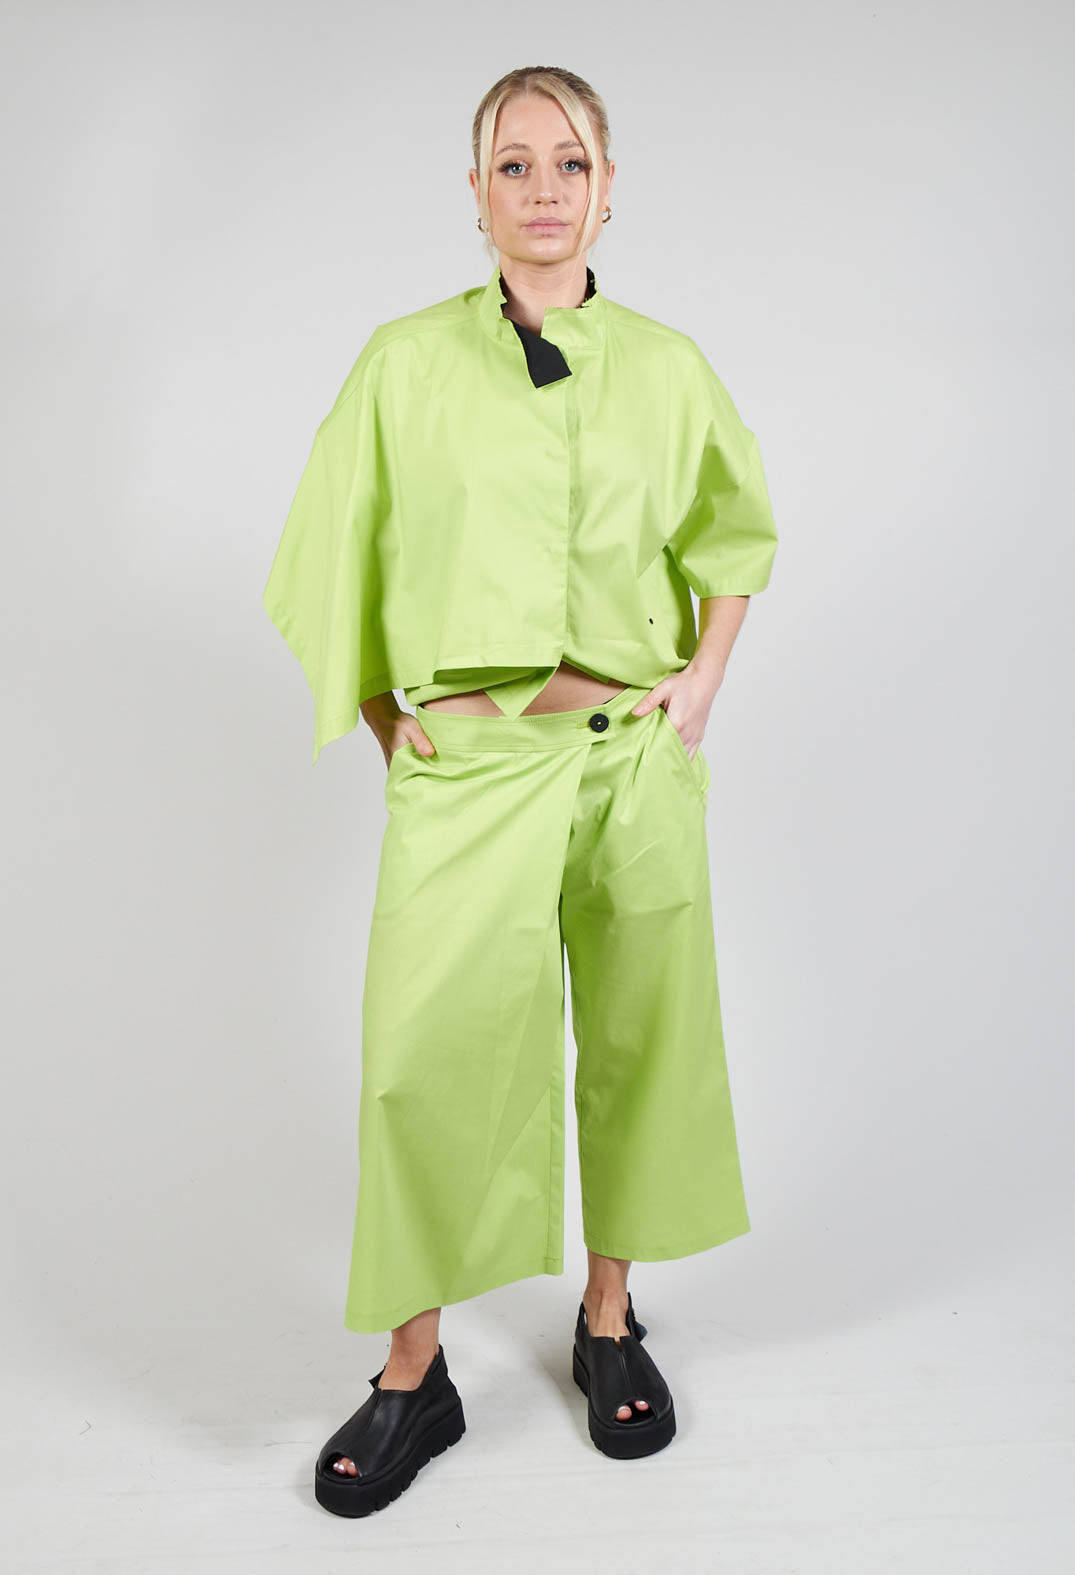 COSE Trousers in Light Green